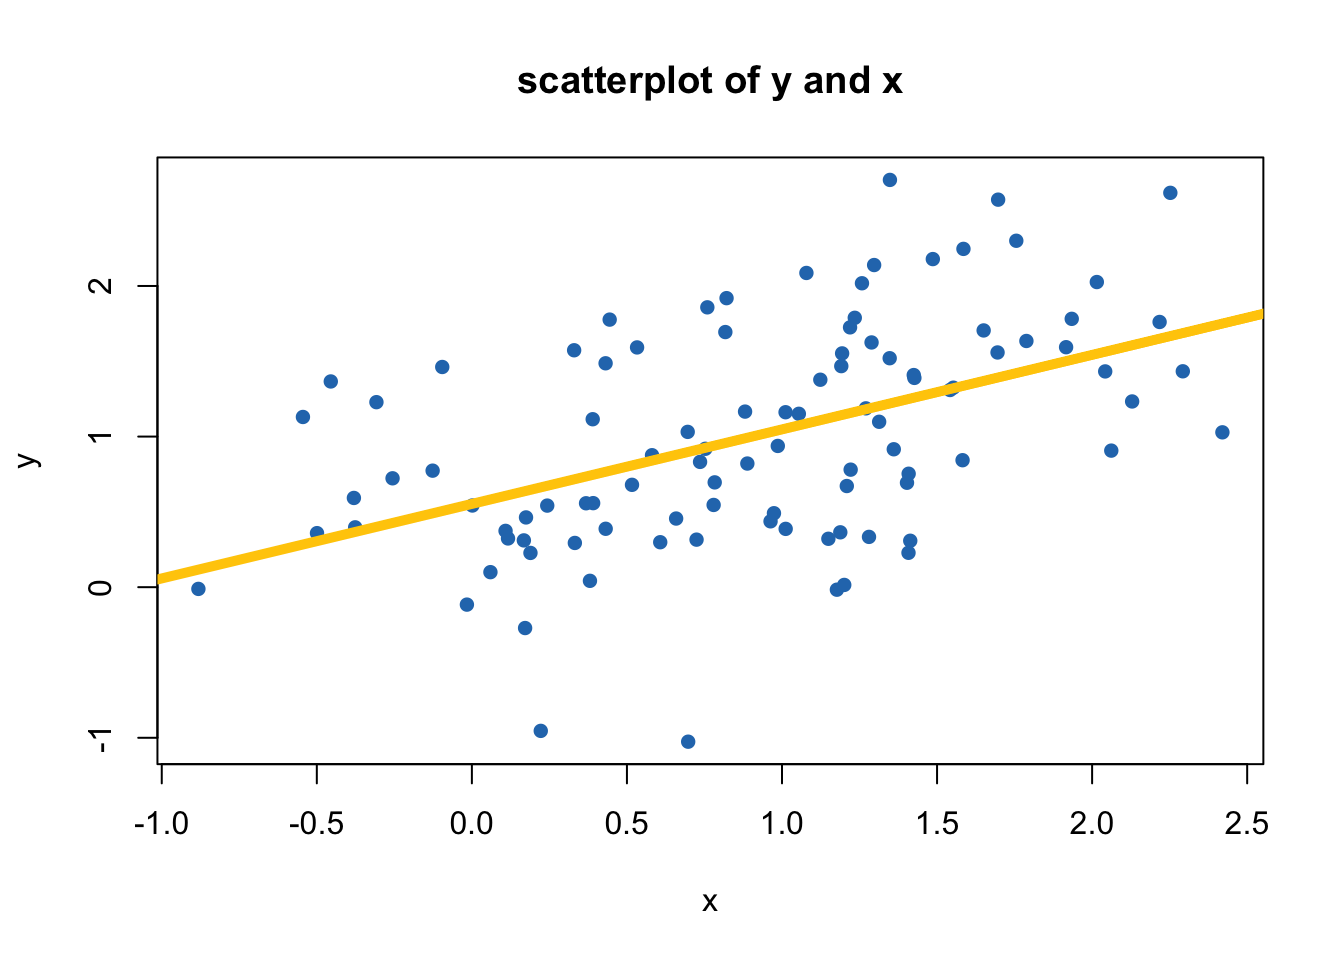 scatterplot of y against x